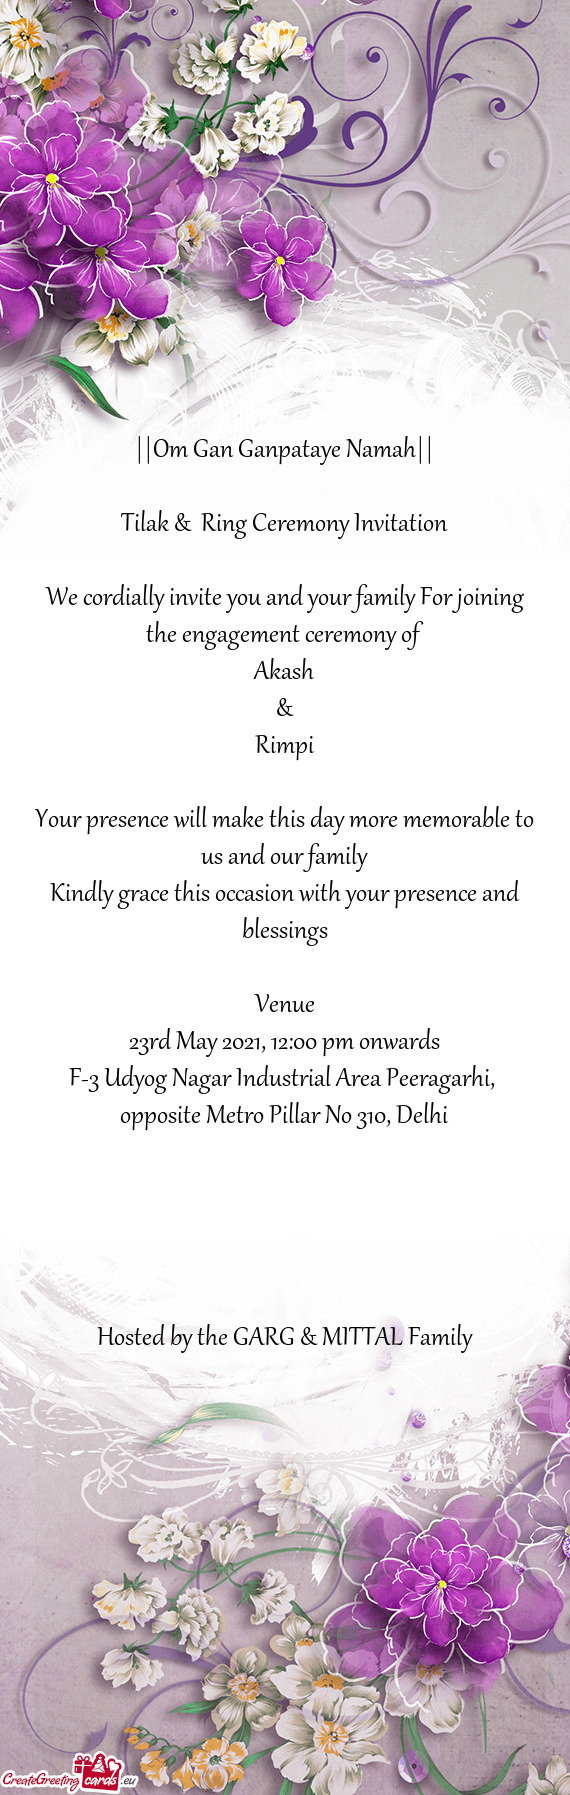 We cordially invite you and your family For joining the engagement ceremony of